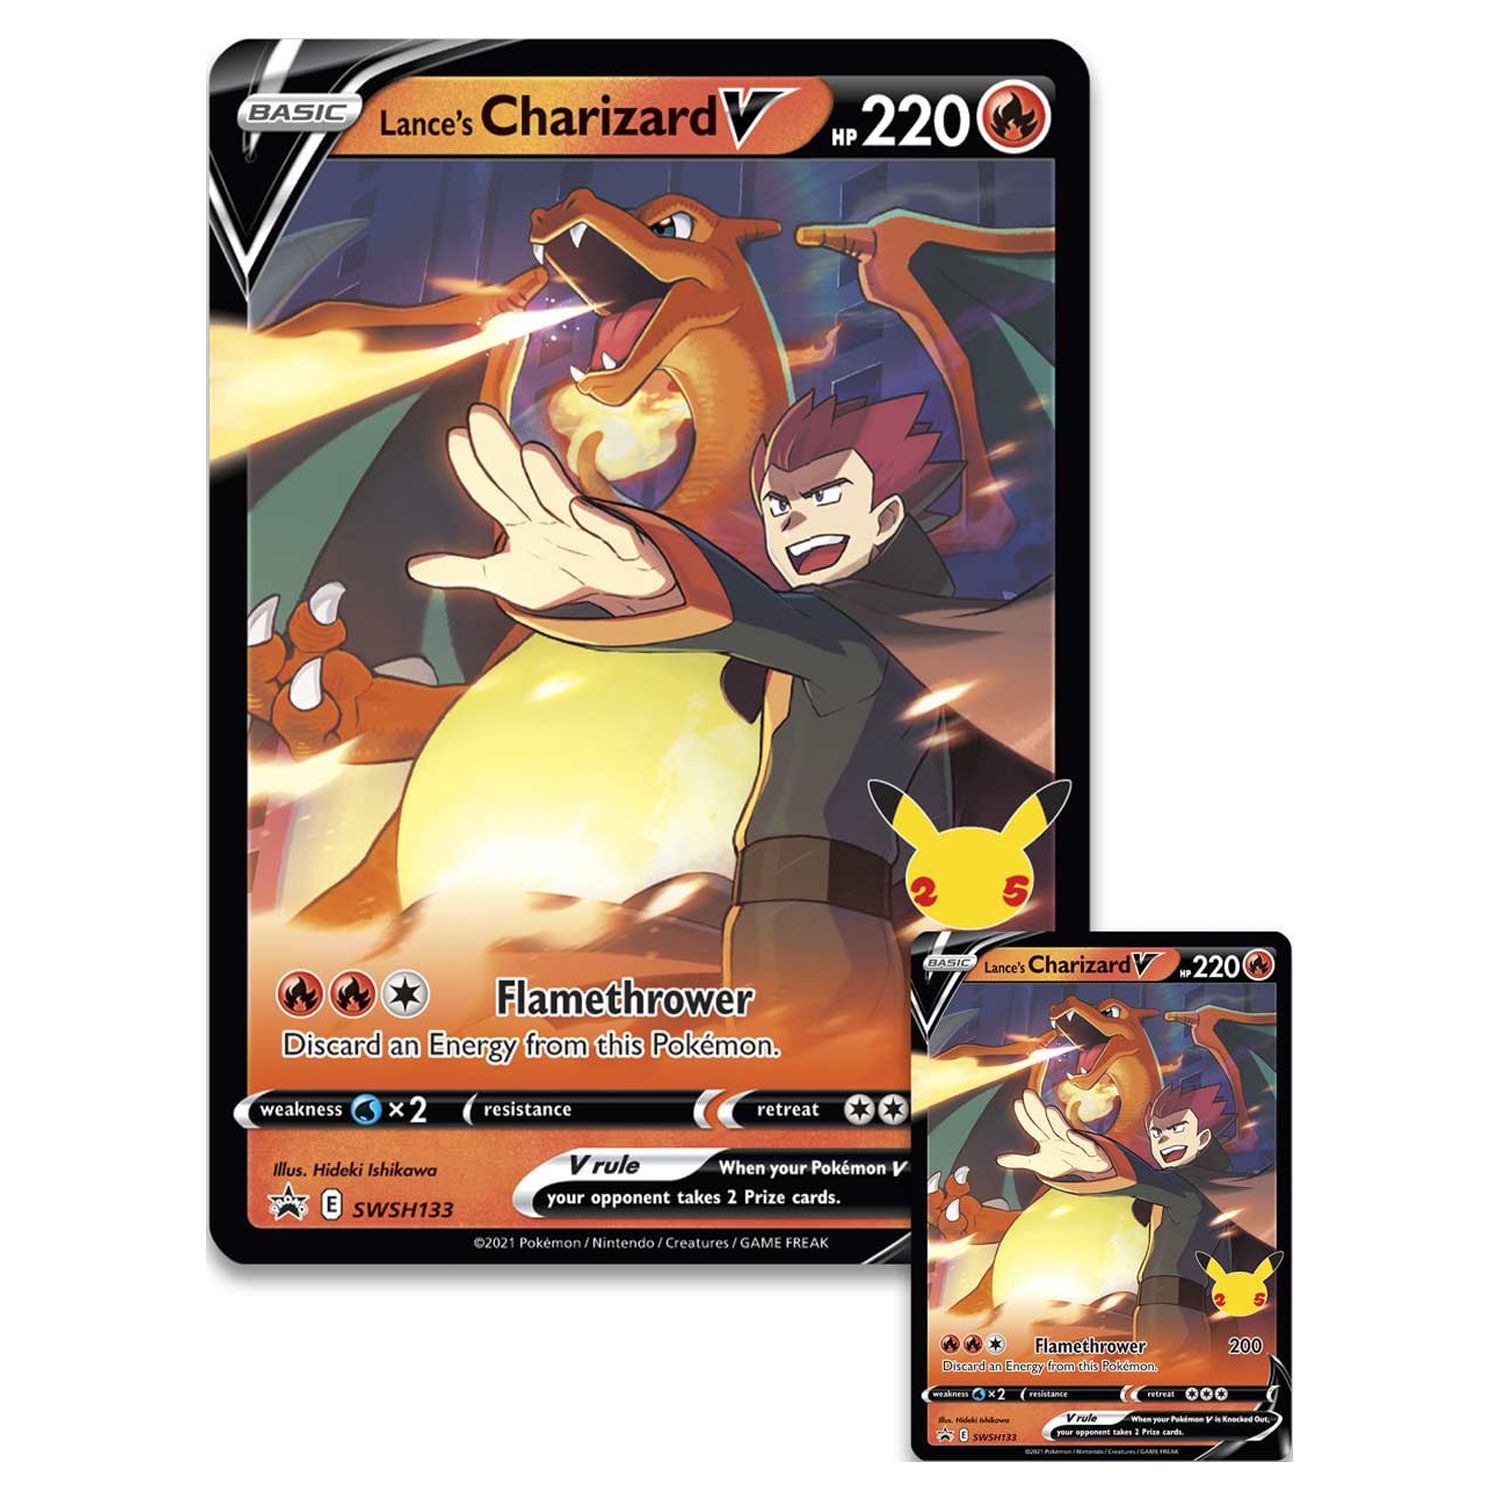 Pokémon Trading Card Games: Celebrations Collection (Lance's Charizard V) - image 2 of 7